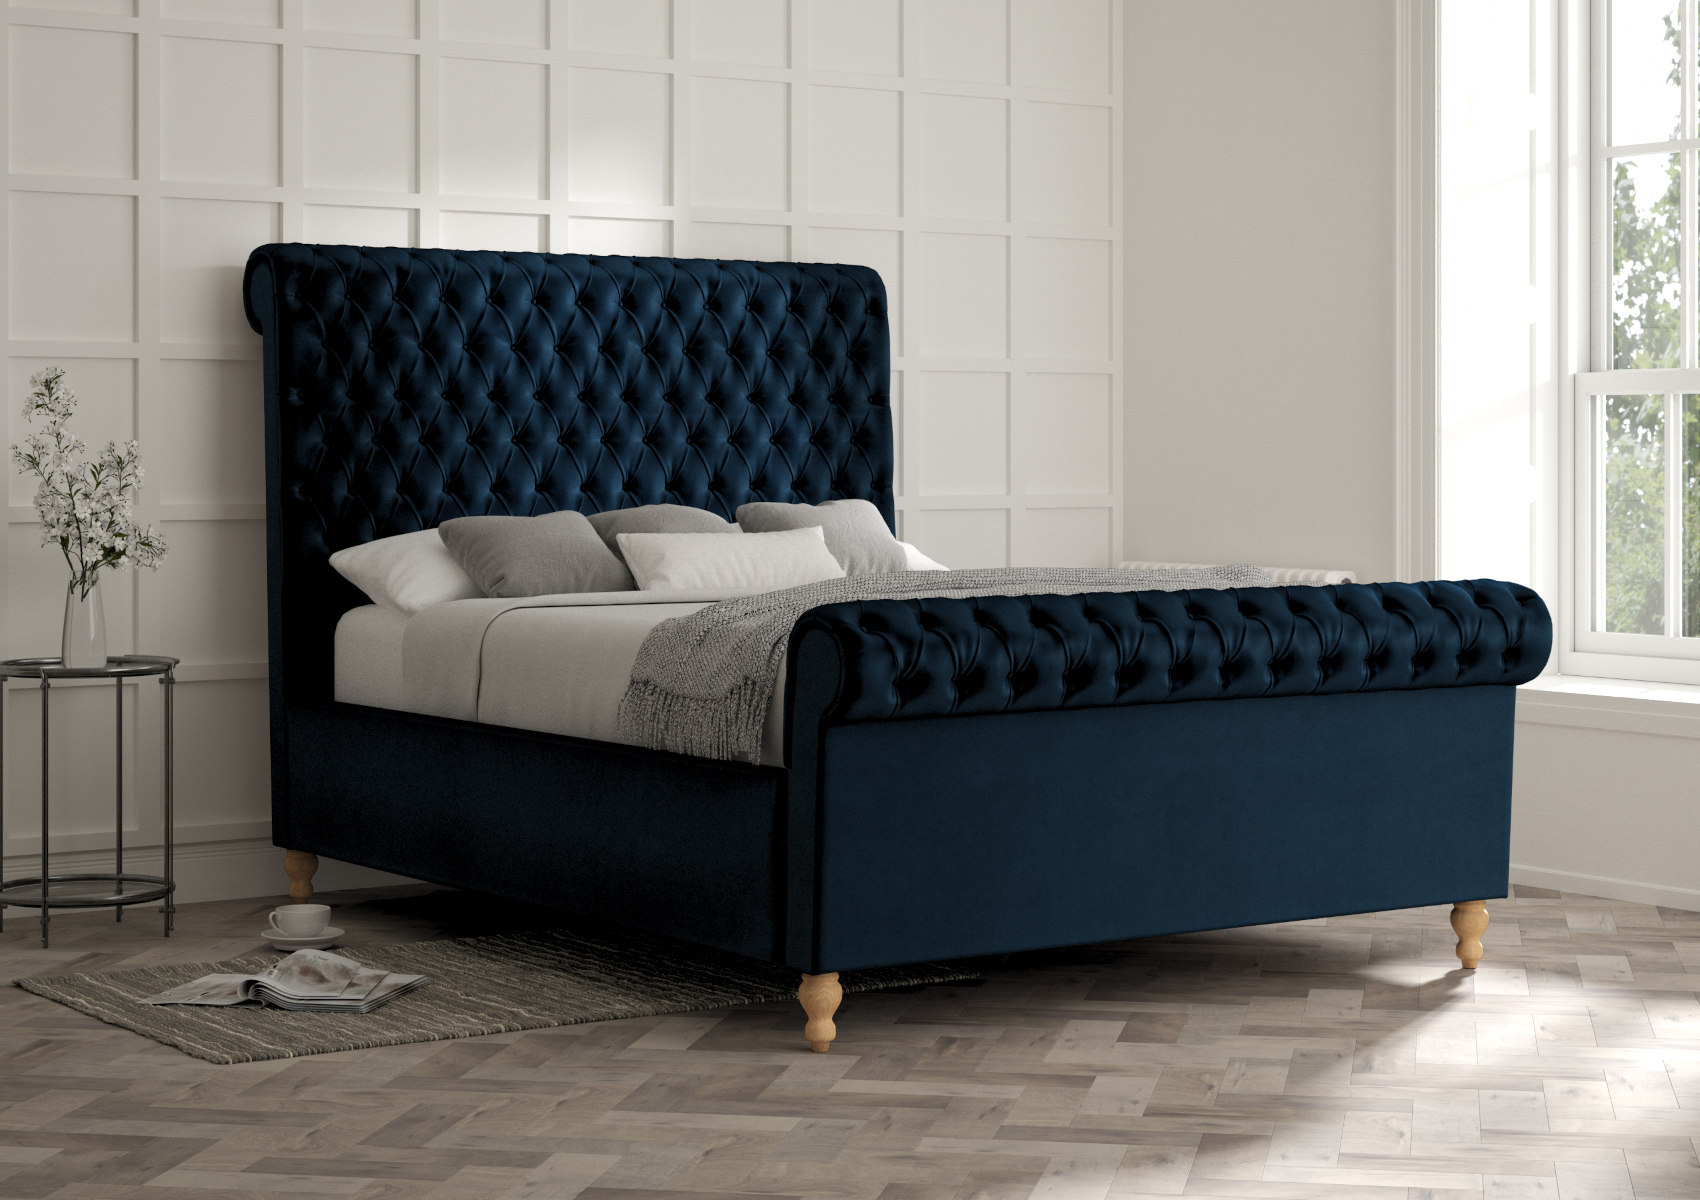 View Aldwych Velvet Navy Upholstered Super King Sleigh Bed Time4Sleep information